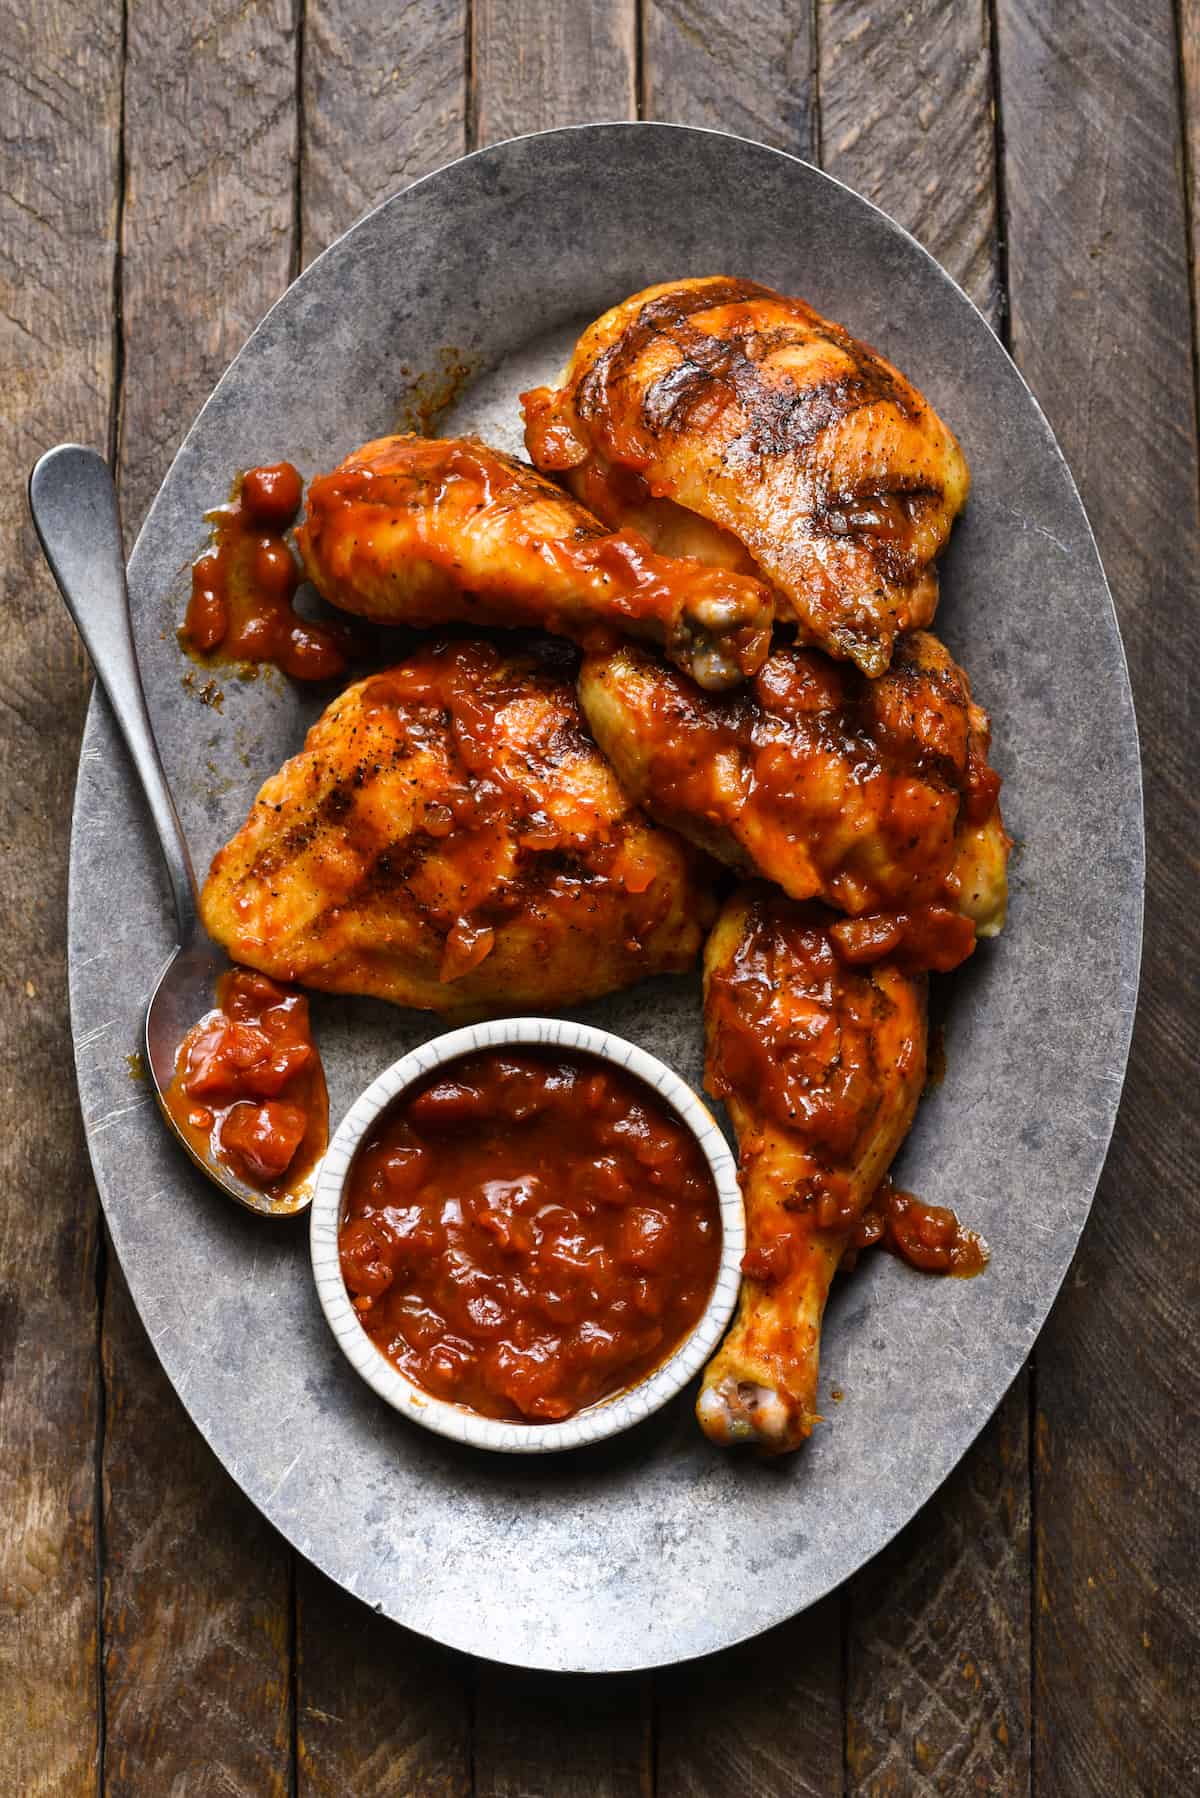 This Harissa Barbecue Chicken is an easy way to add a little spice to classic grilled chicken! | foxeslovelemons.com